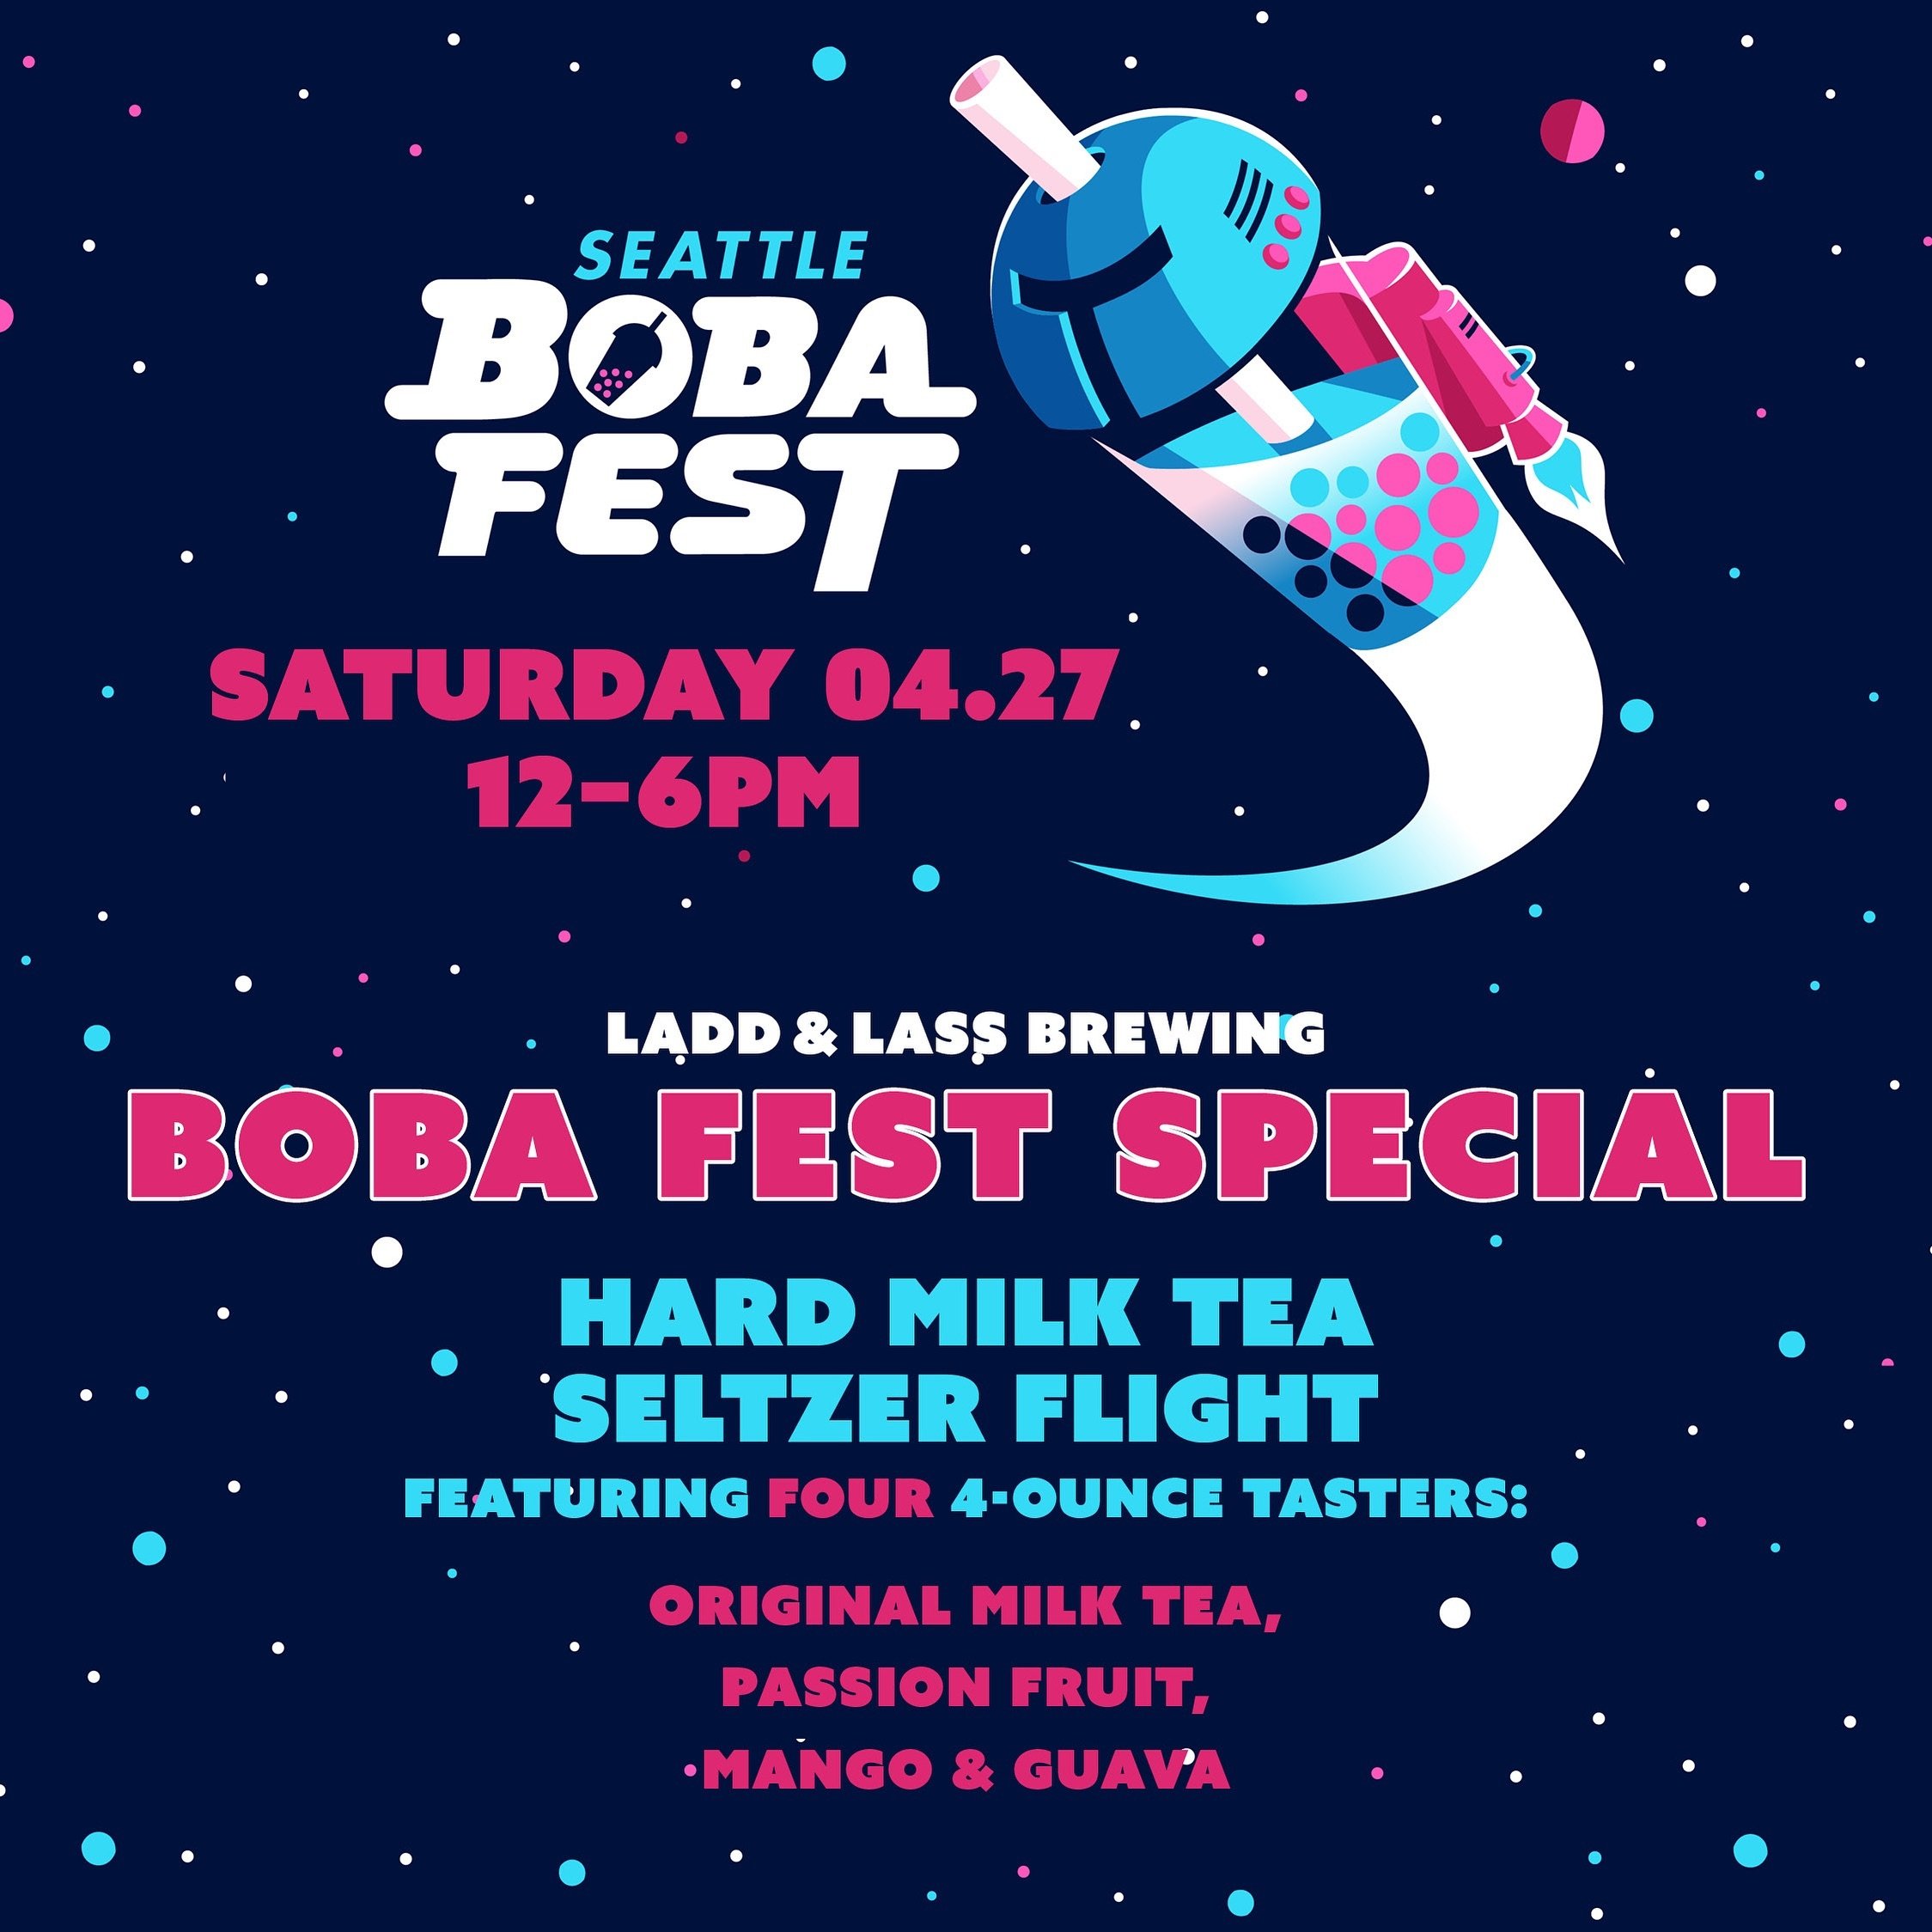 SAVE THE DATE cause we&rsquo;re joining in on the @udistrictpartnership Boba Fest fun this year!!!

🧋SAT 4/27🧋12-6PM🧋
Come visit us at the taproom for a very special seltzer flight! Brewed with whole leaf Ceylon and Assam black tea, we have manage